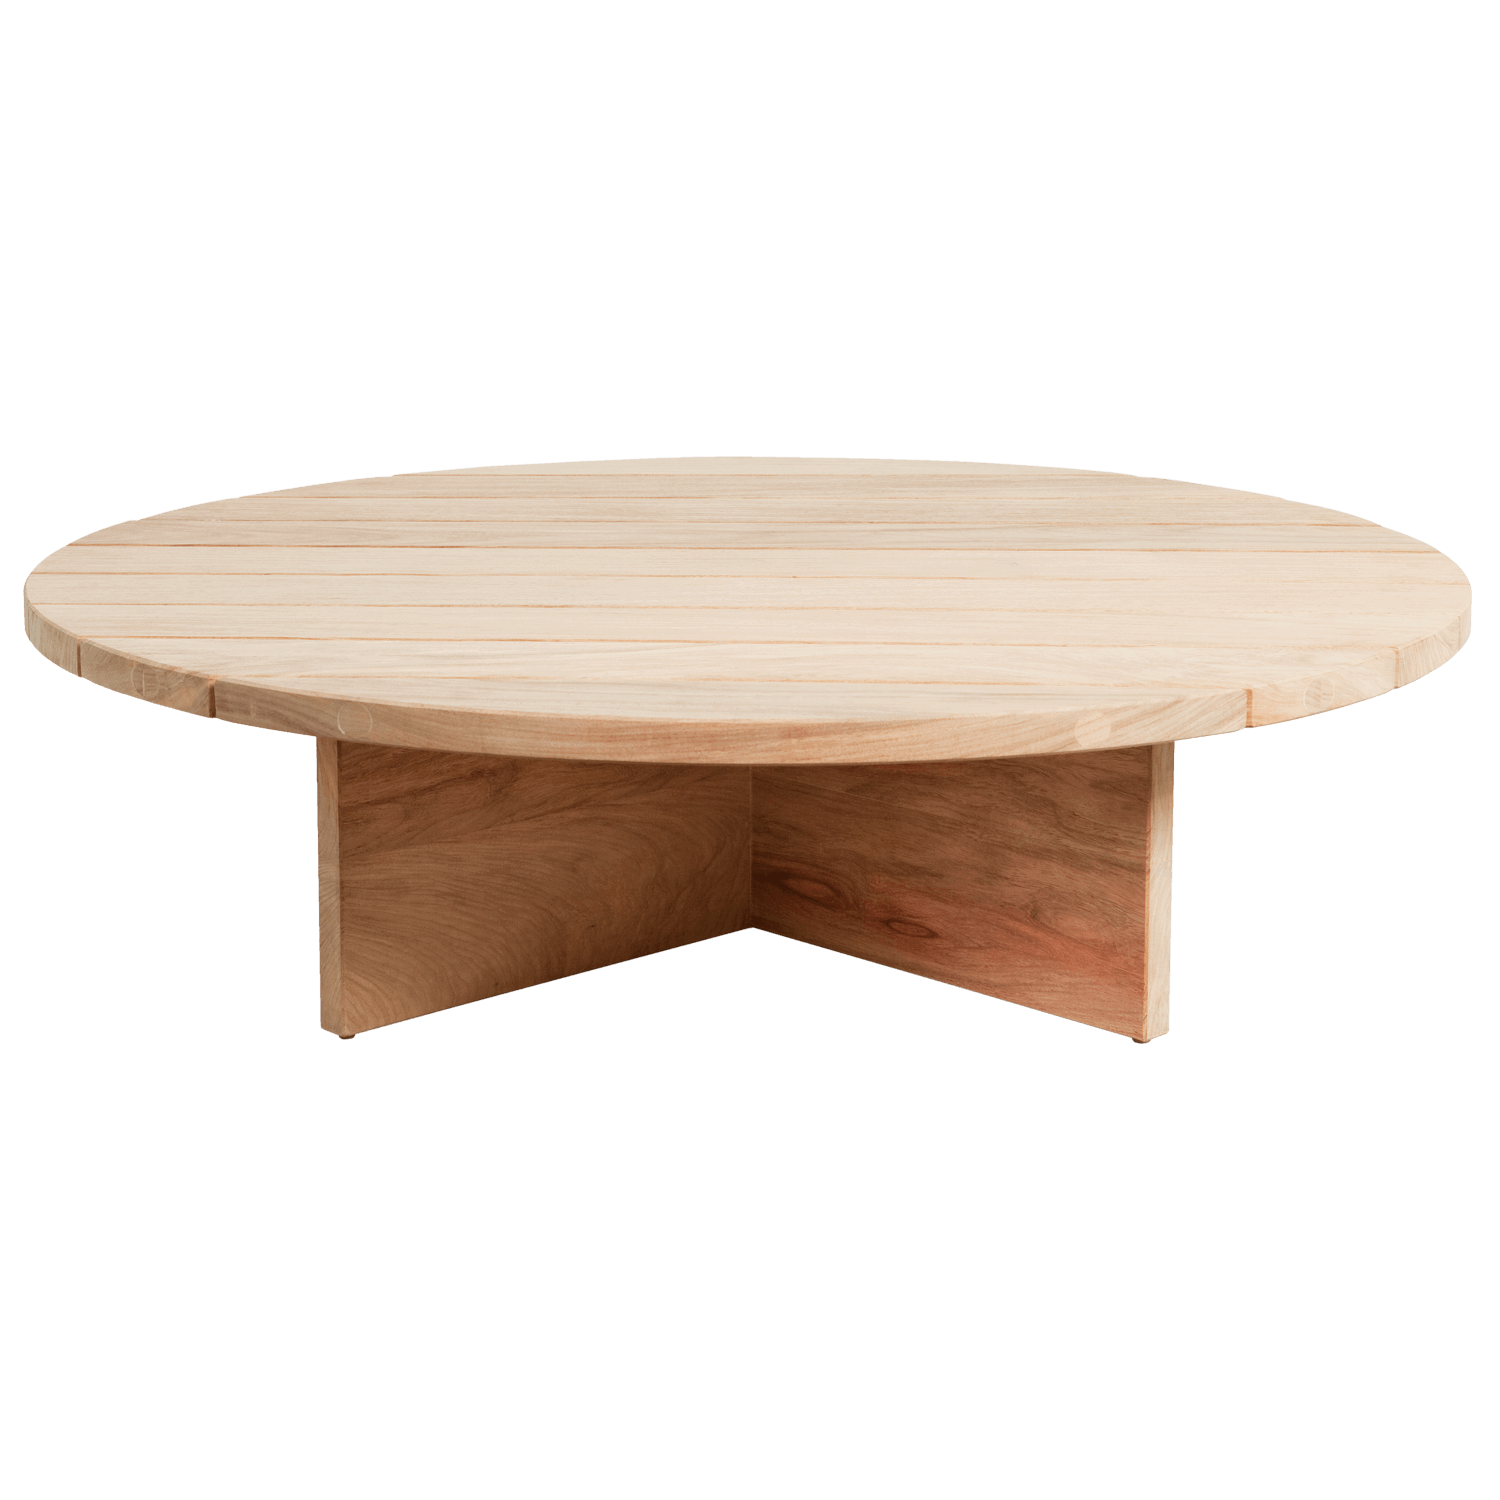 Coffee Table PNG Image High Quality PNG Image